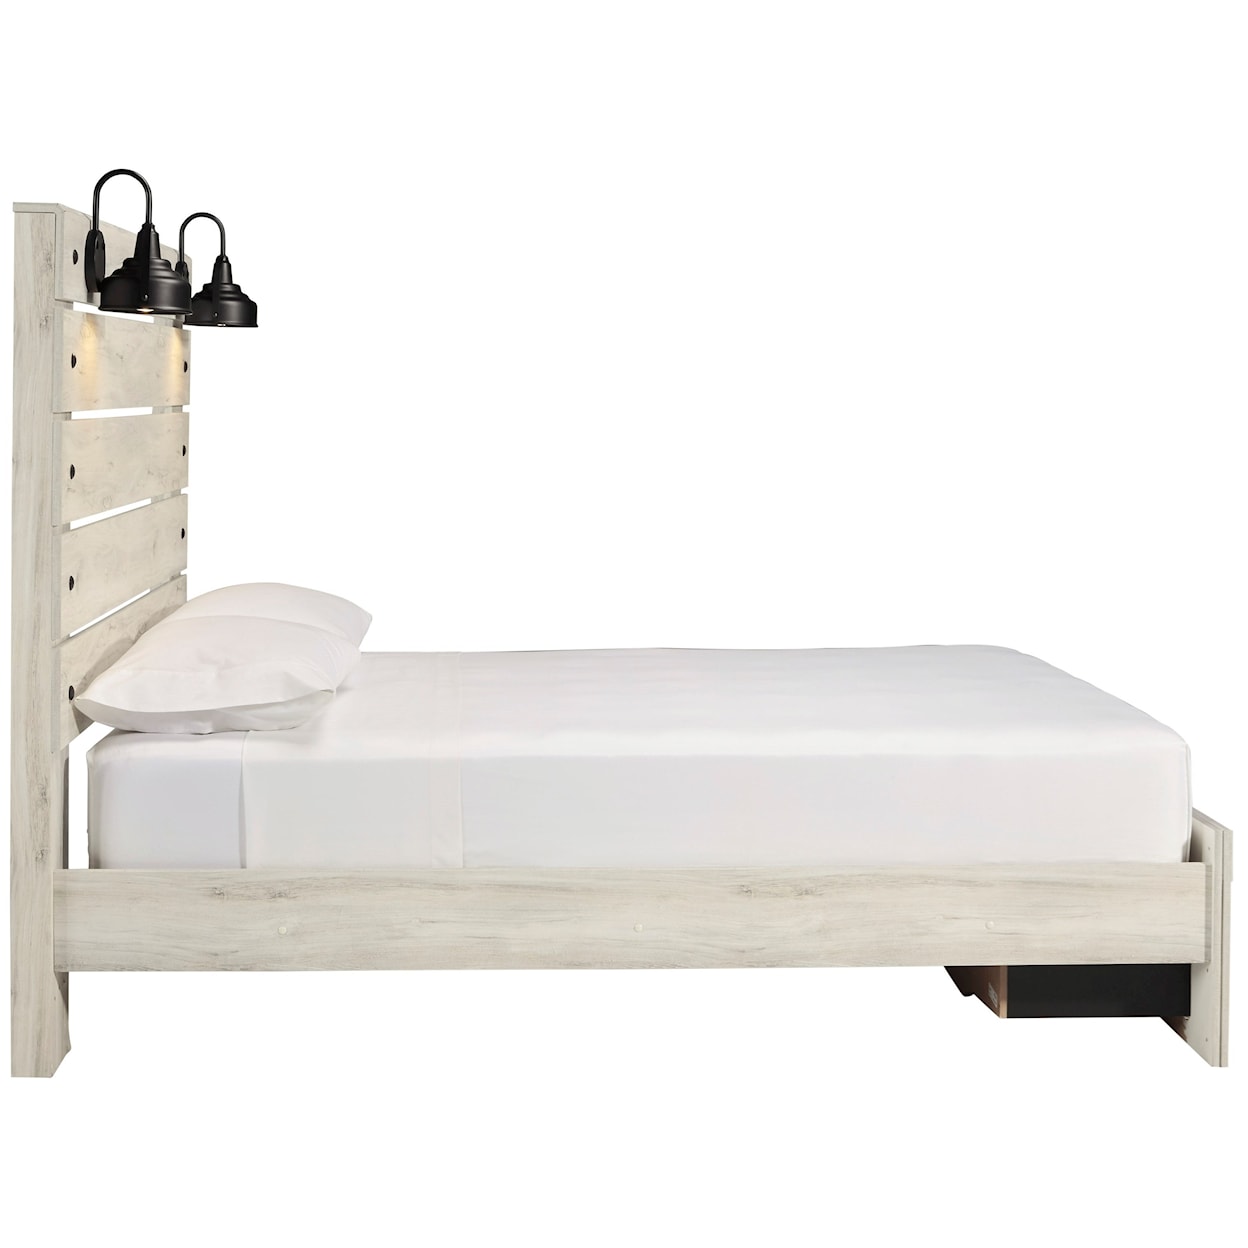 Michael Alan Select Cambeck Queen Bed w/ Lights & Footboard Drawers